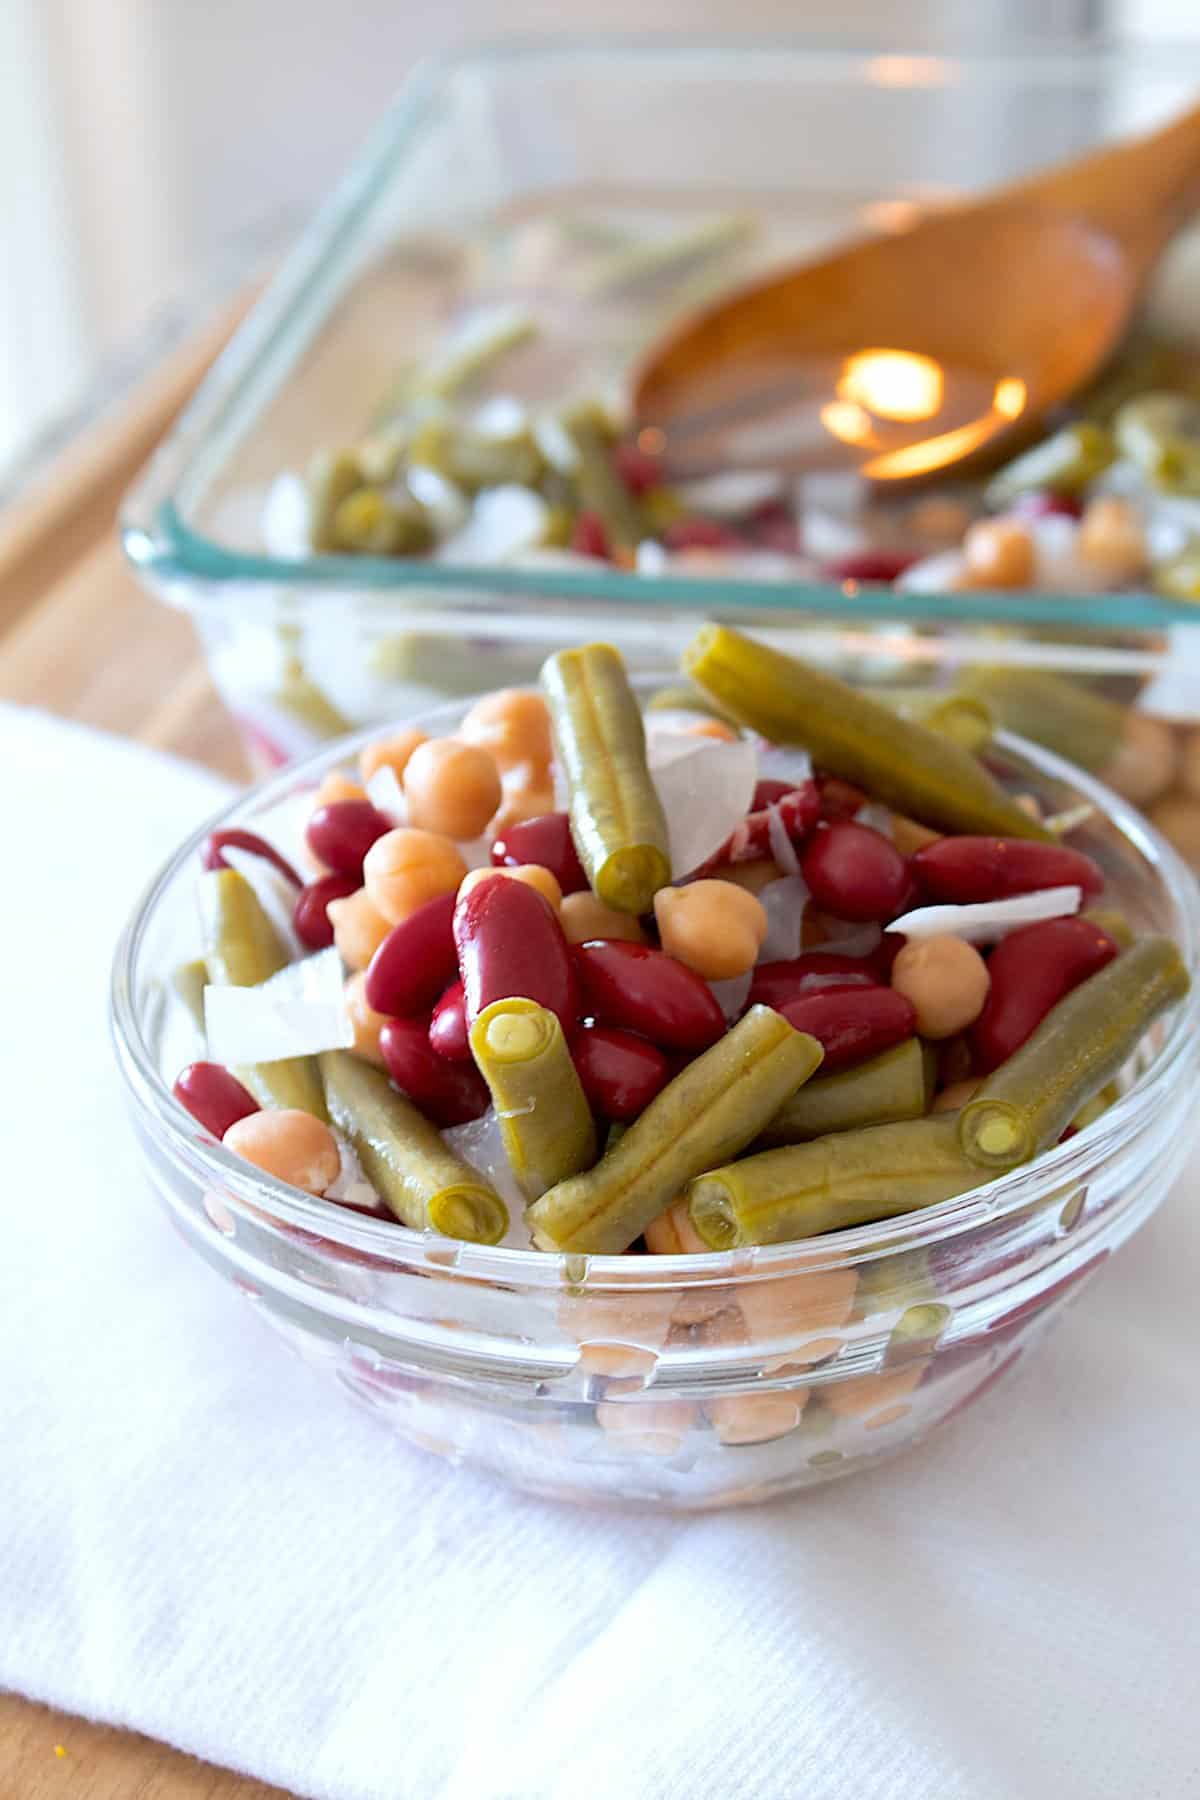 quick pickled three bean salad in a clear dish on a dish towel